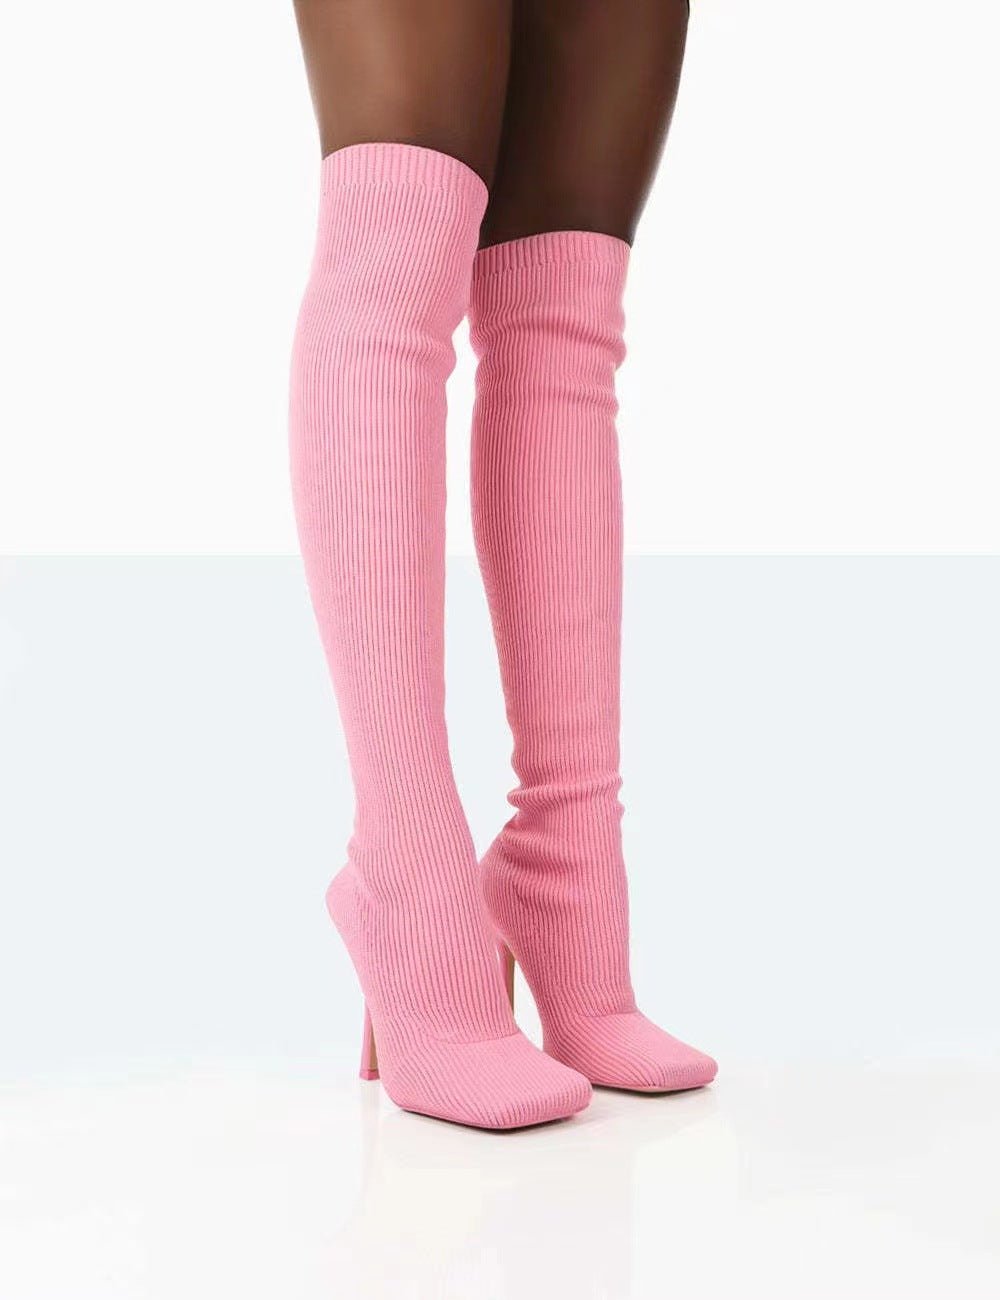 Thigh High Boots Women Over The Knee Long Boots Fashion Shoes - Boots -  Trend Goods